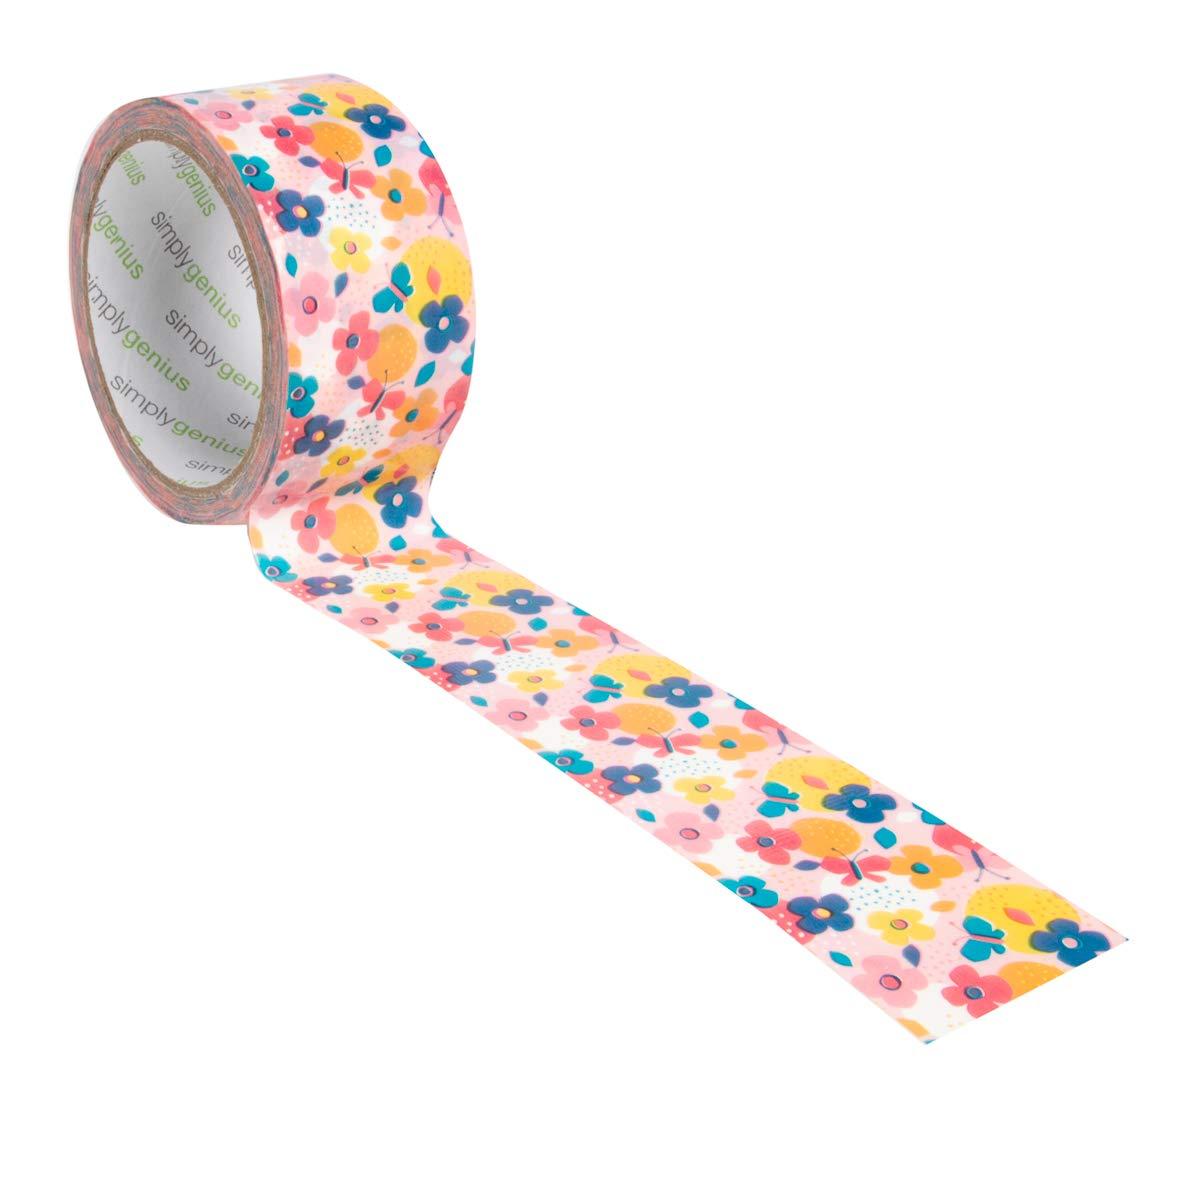 Simply Genius Single Roll Patterned Duct Tape Roll Macao